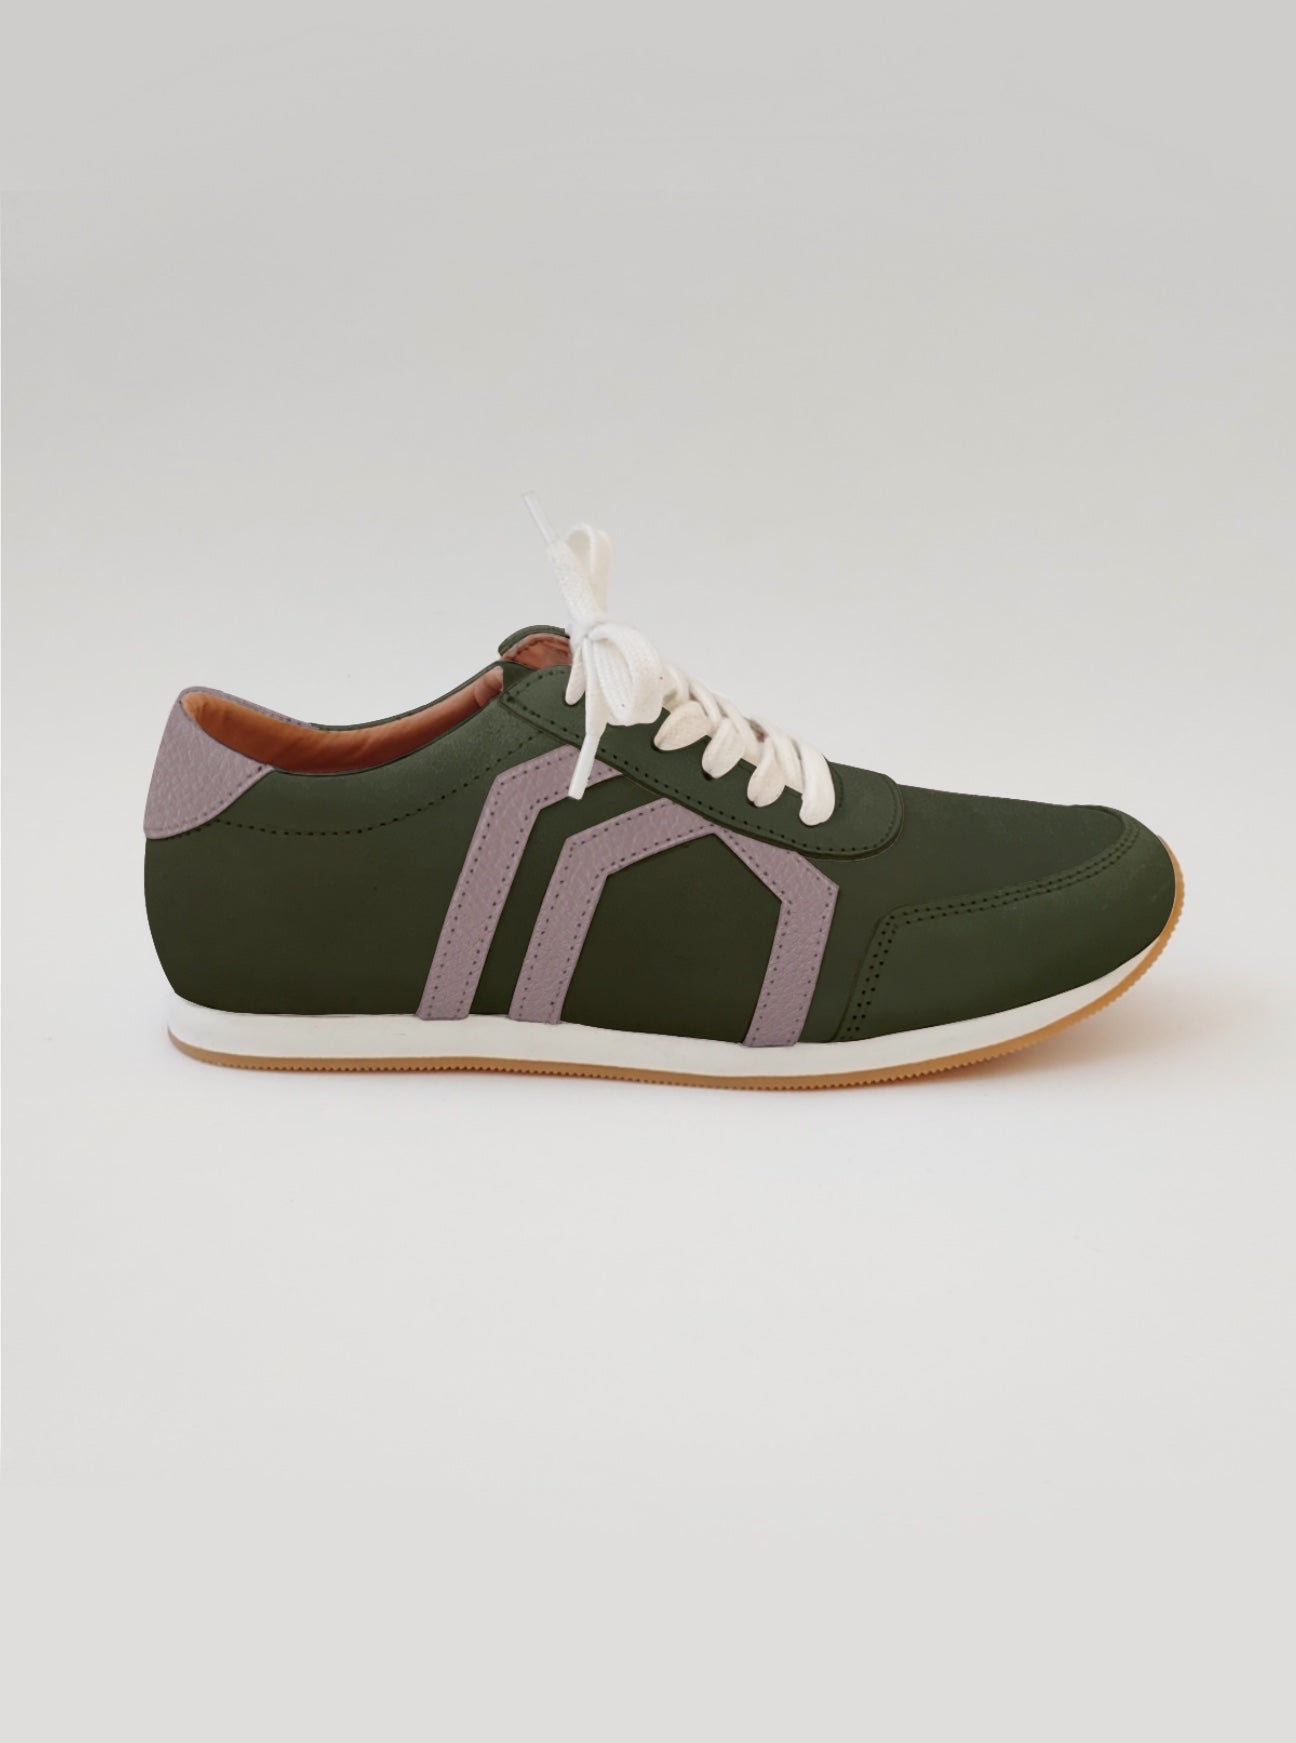 Jessie Sneaker in Olive Nubuck with Ash Rose Hex (PREORDER)